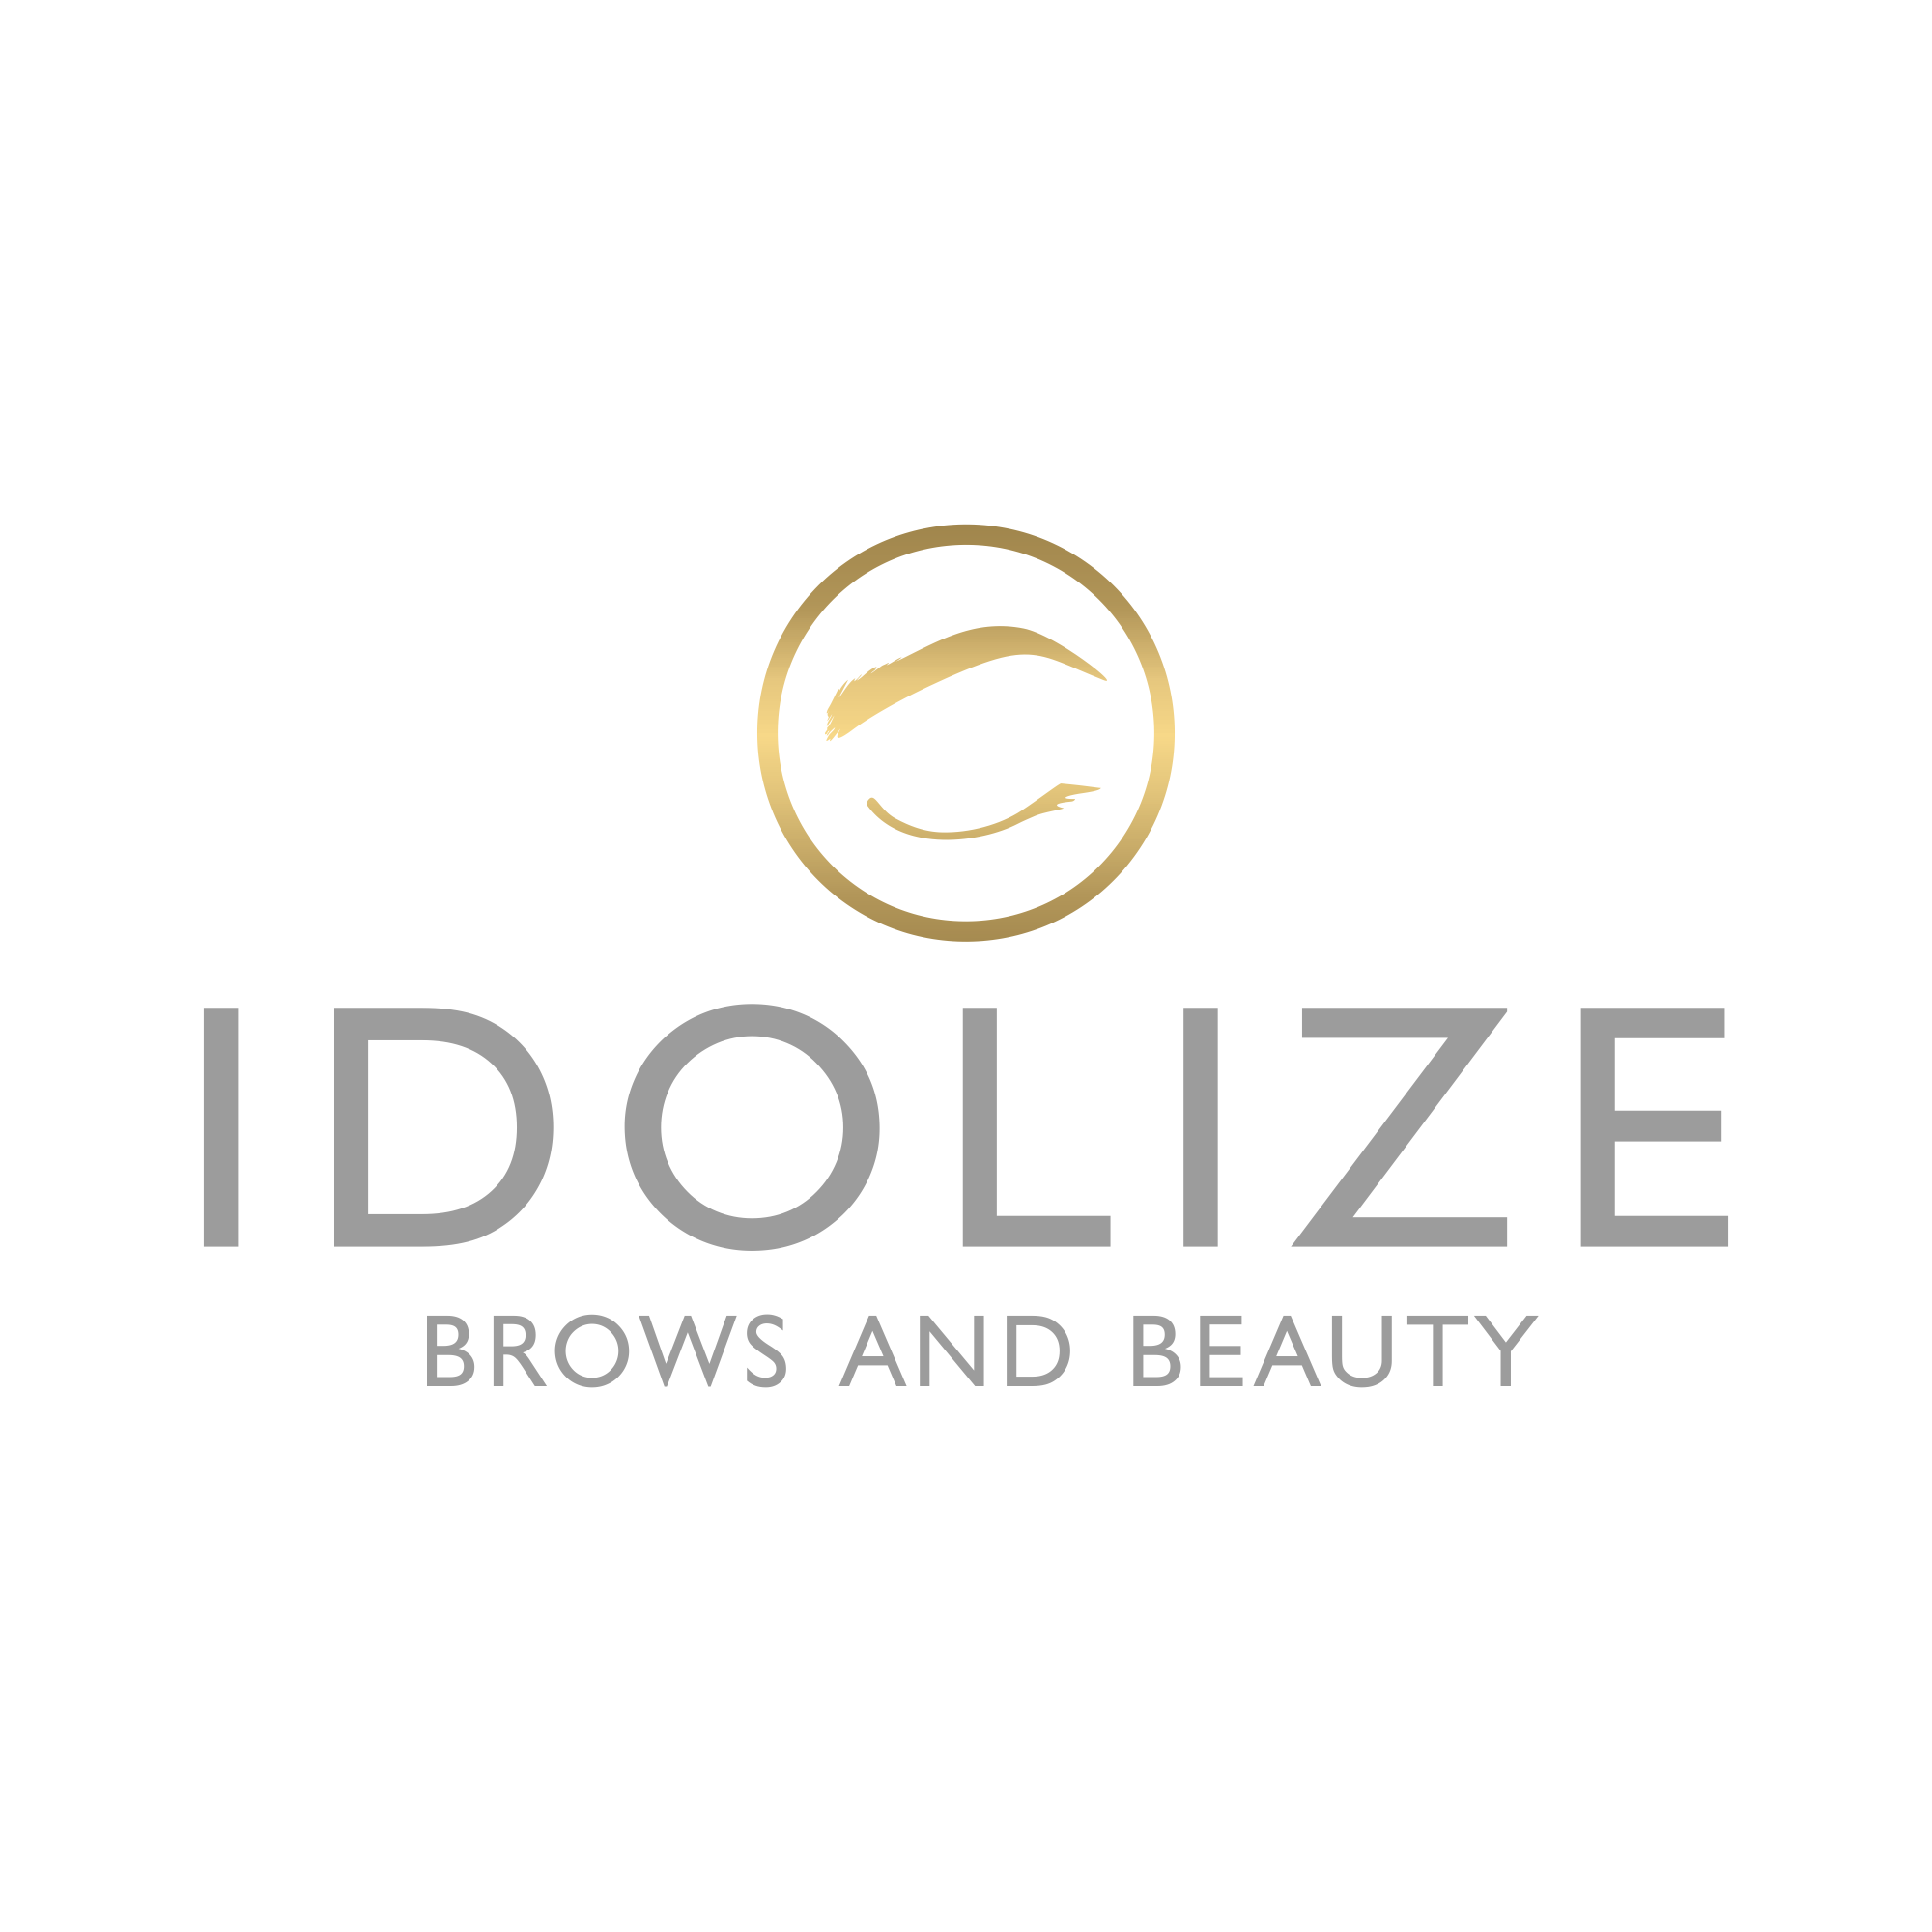 Idolize Brows and Beauty at Steele Creek - Charlotte, NC 28273 - (704)587-1077 | ShowMeLocal.com